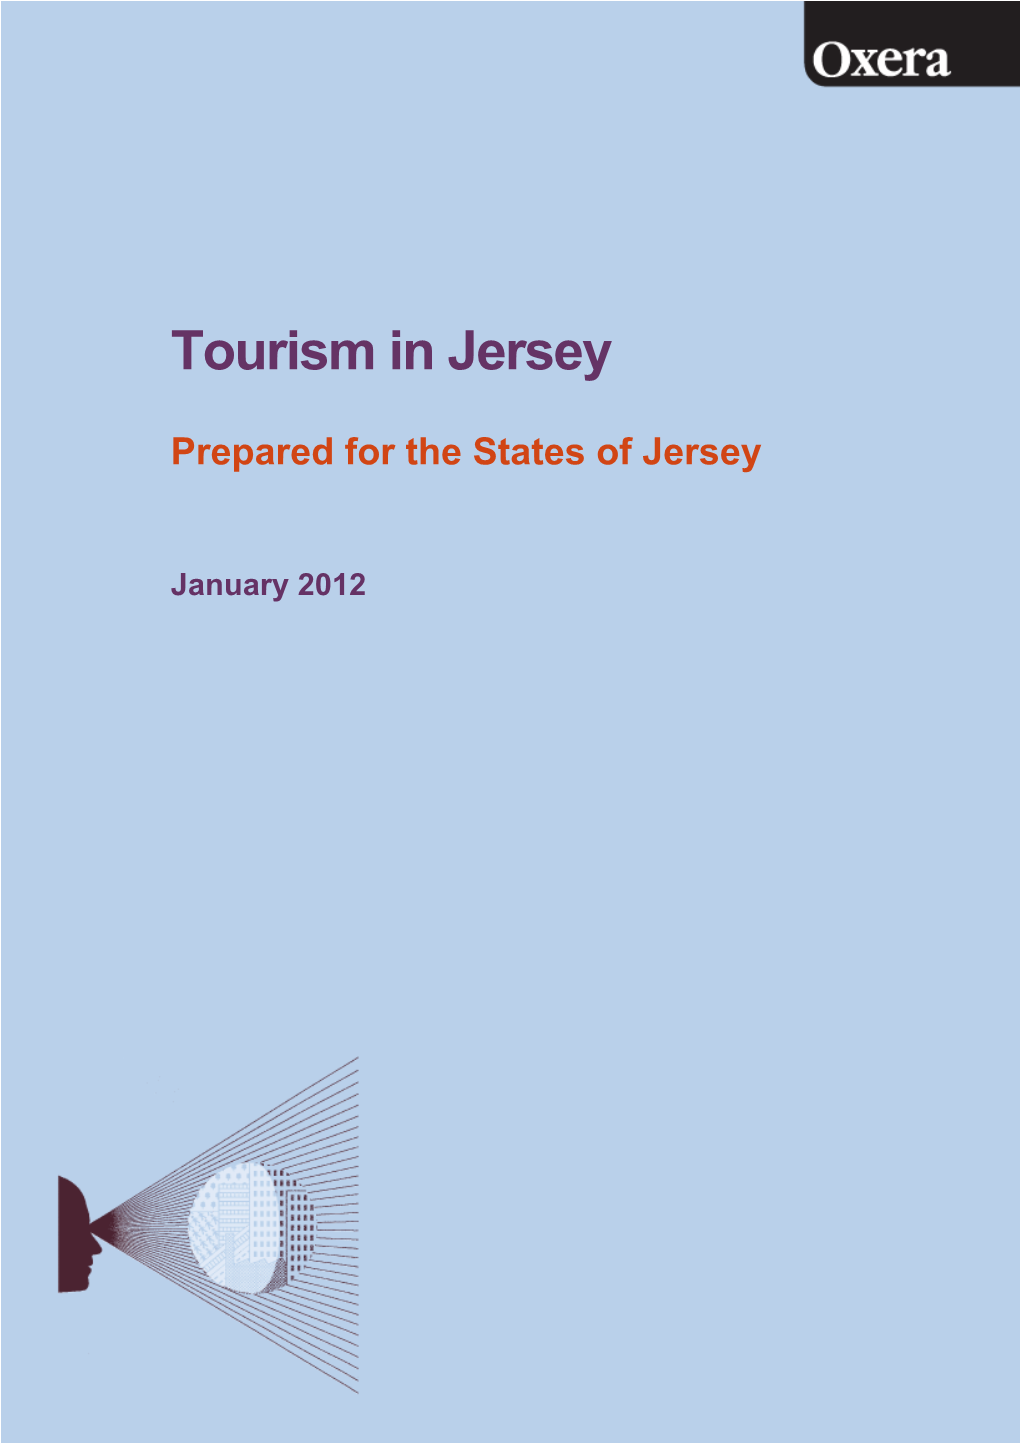 Tourism in Jersey